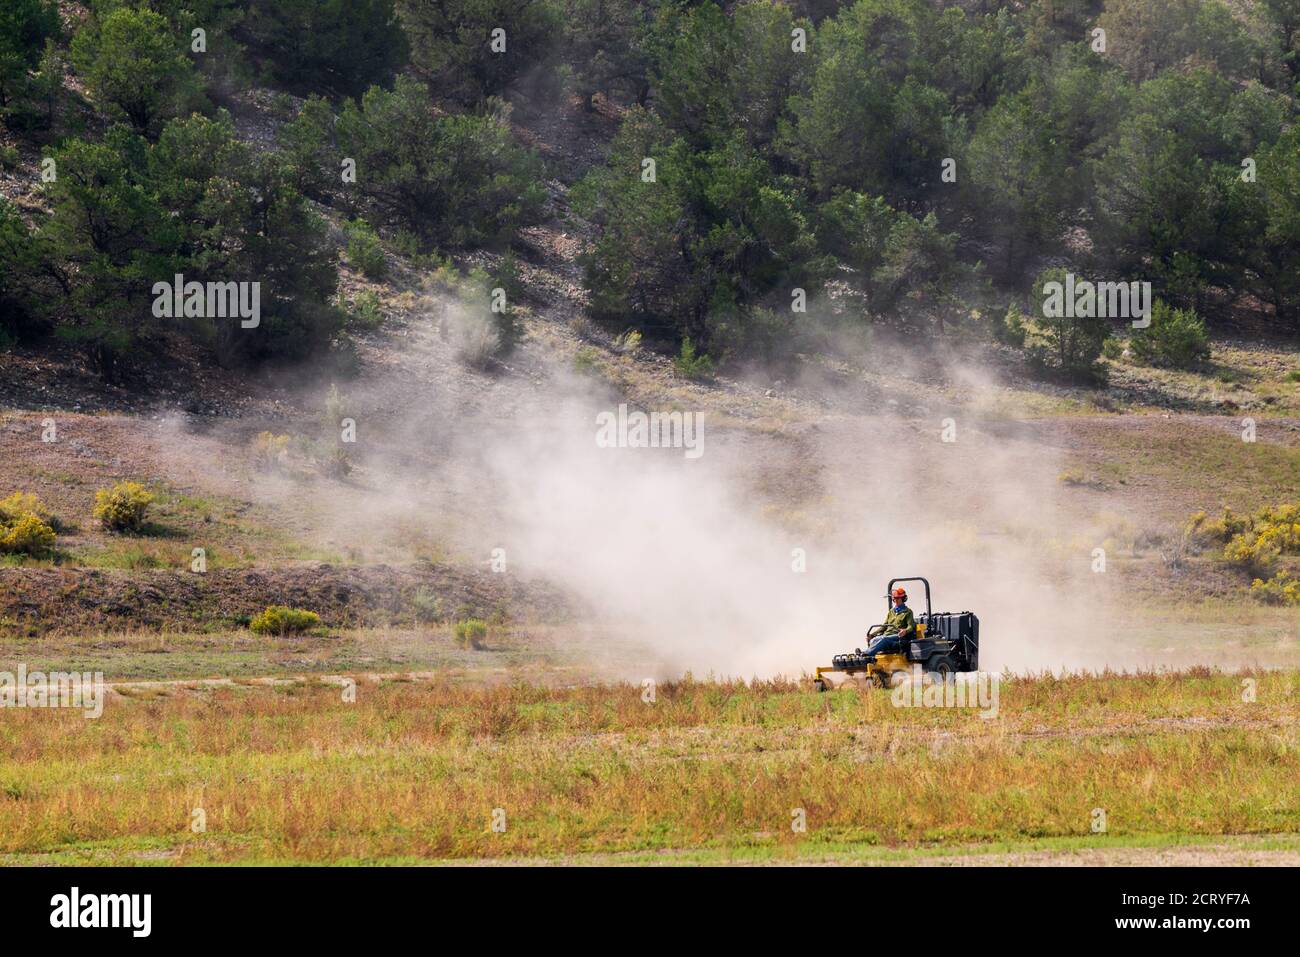 Man mowing dry & dusty pasture with tractor; Central Colorado; USA Stock Photo